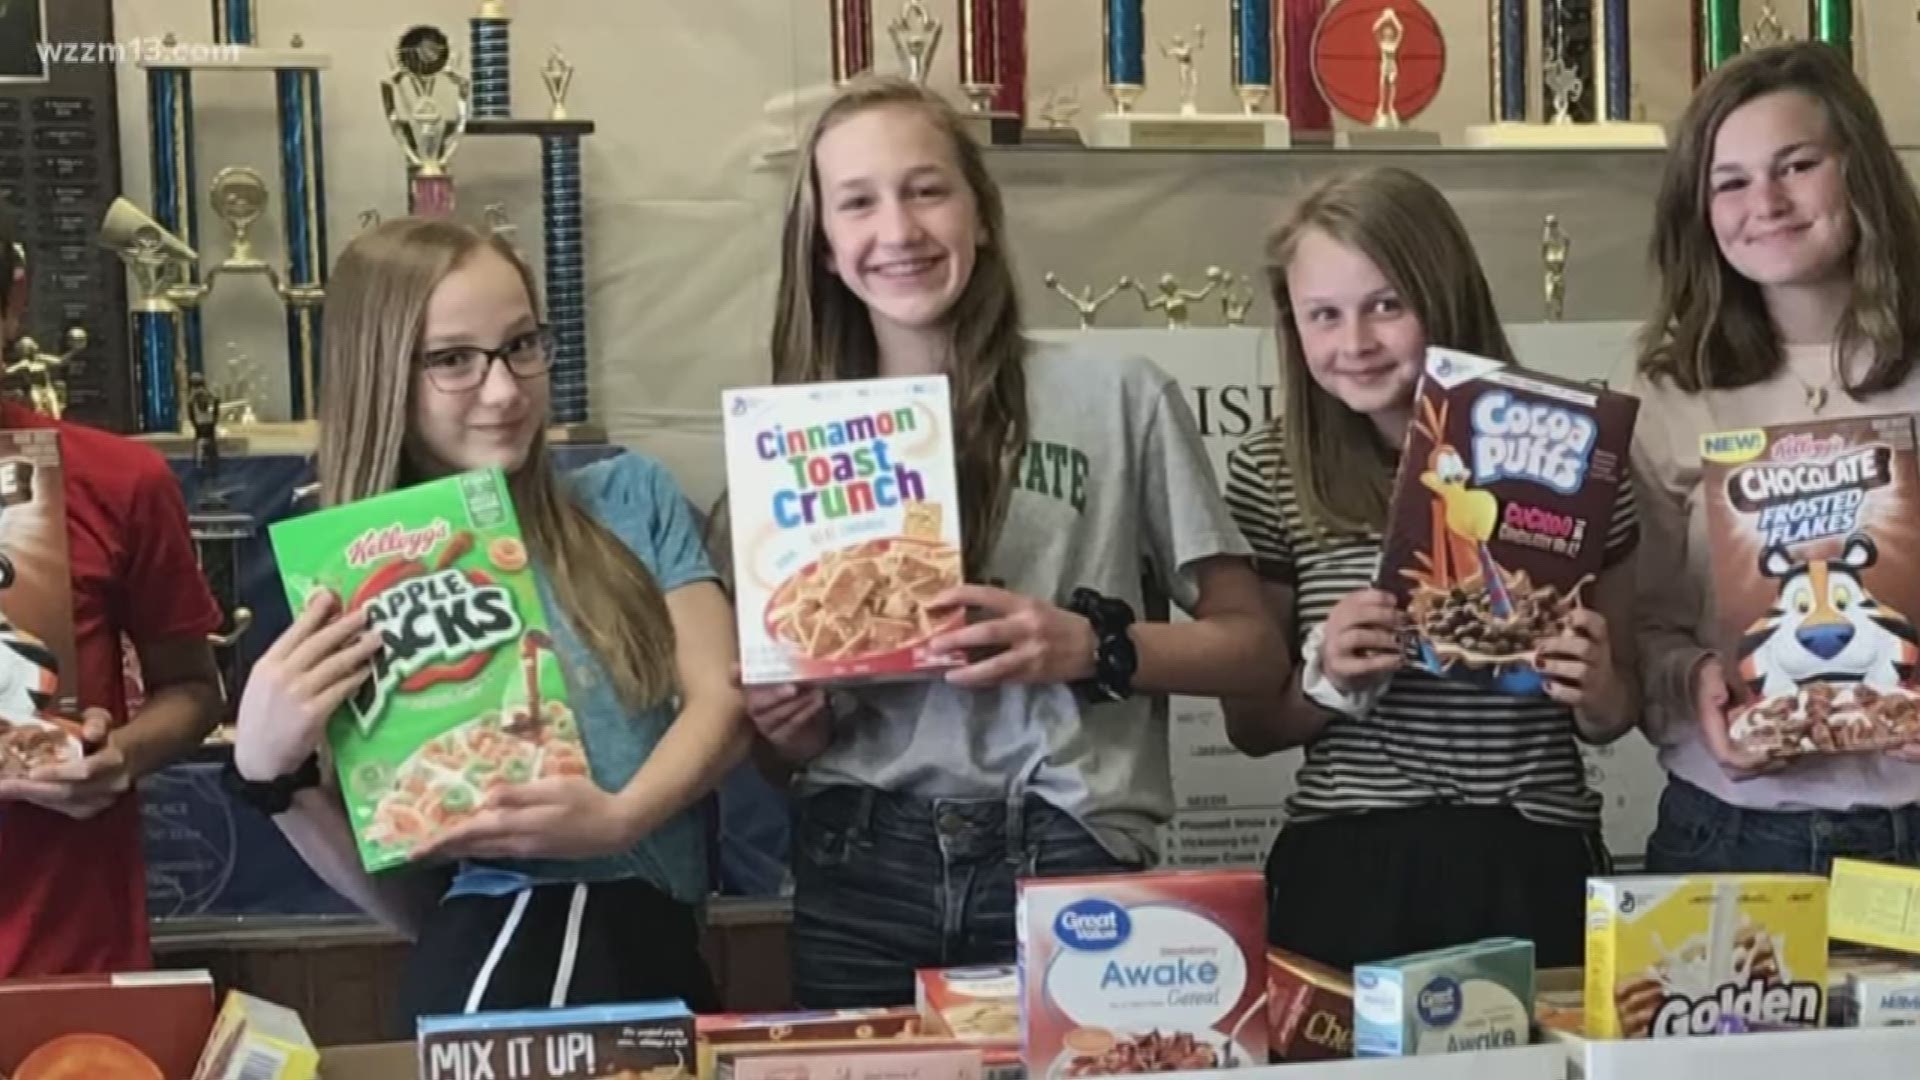 The cereal drive aims to fight food insecurity.